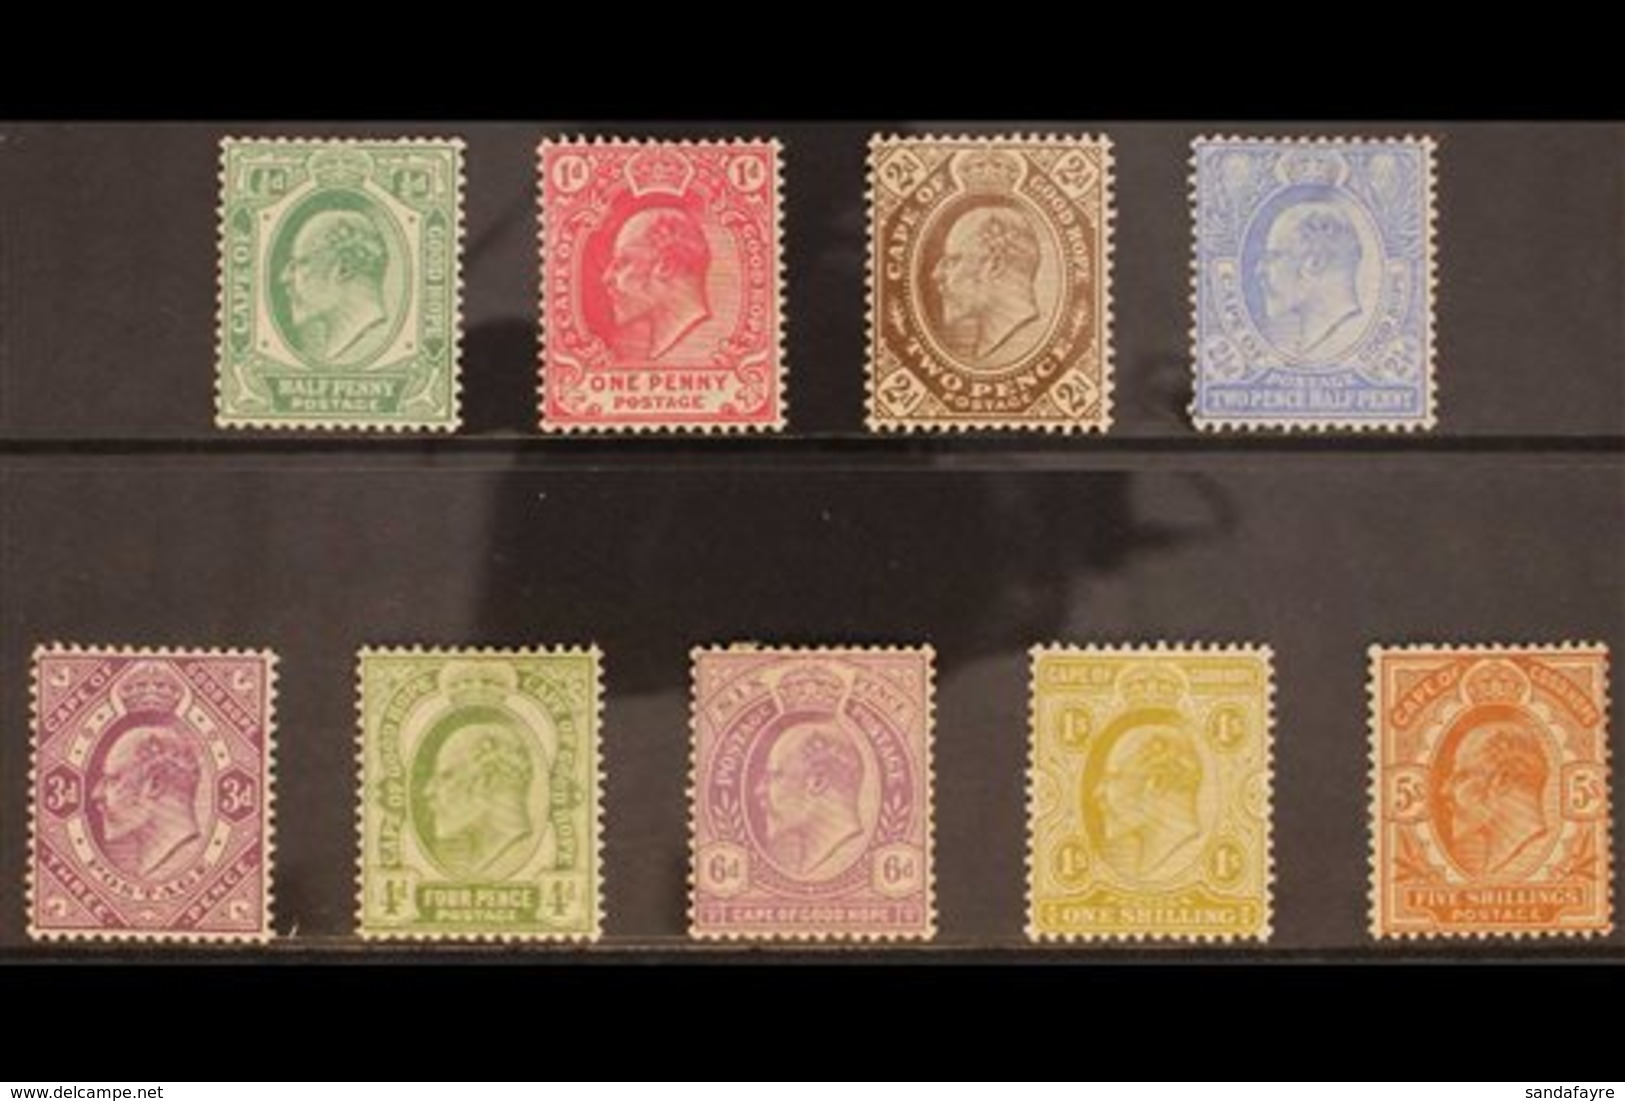 CAPE OF GOOD HOPE  1902-04 KEVII Definitive Complete Set, SG 70/78, Fine Mint (9 Stamps) For More Images, Please Visit H - Unclassified